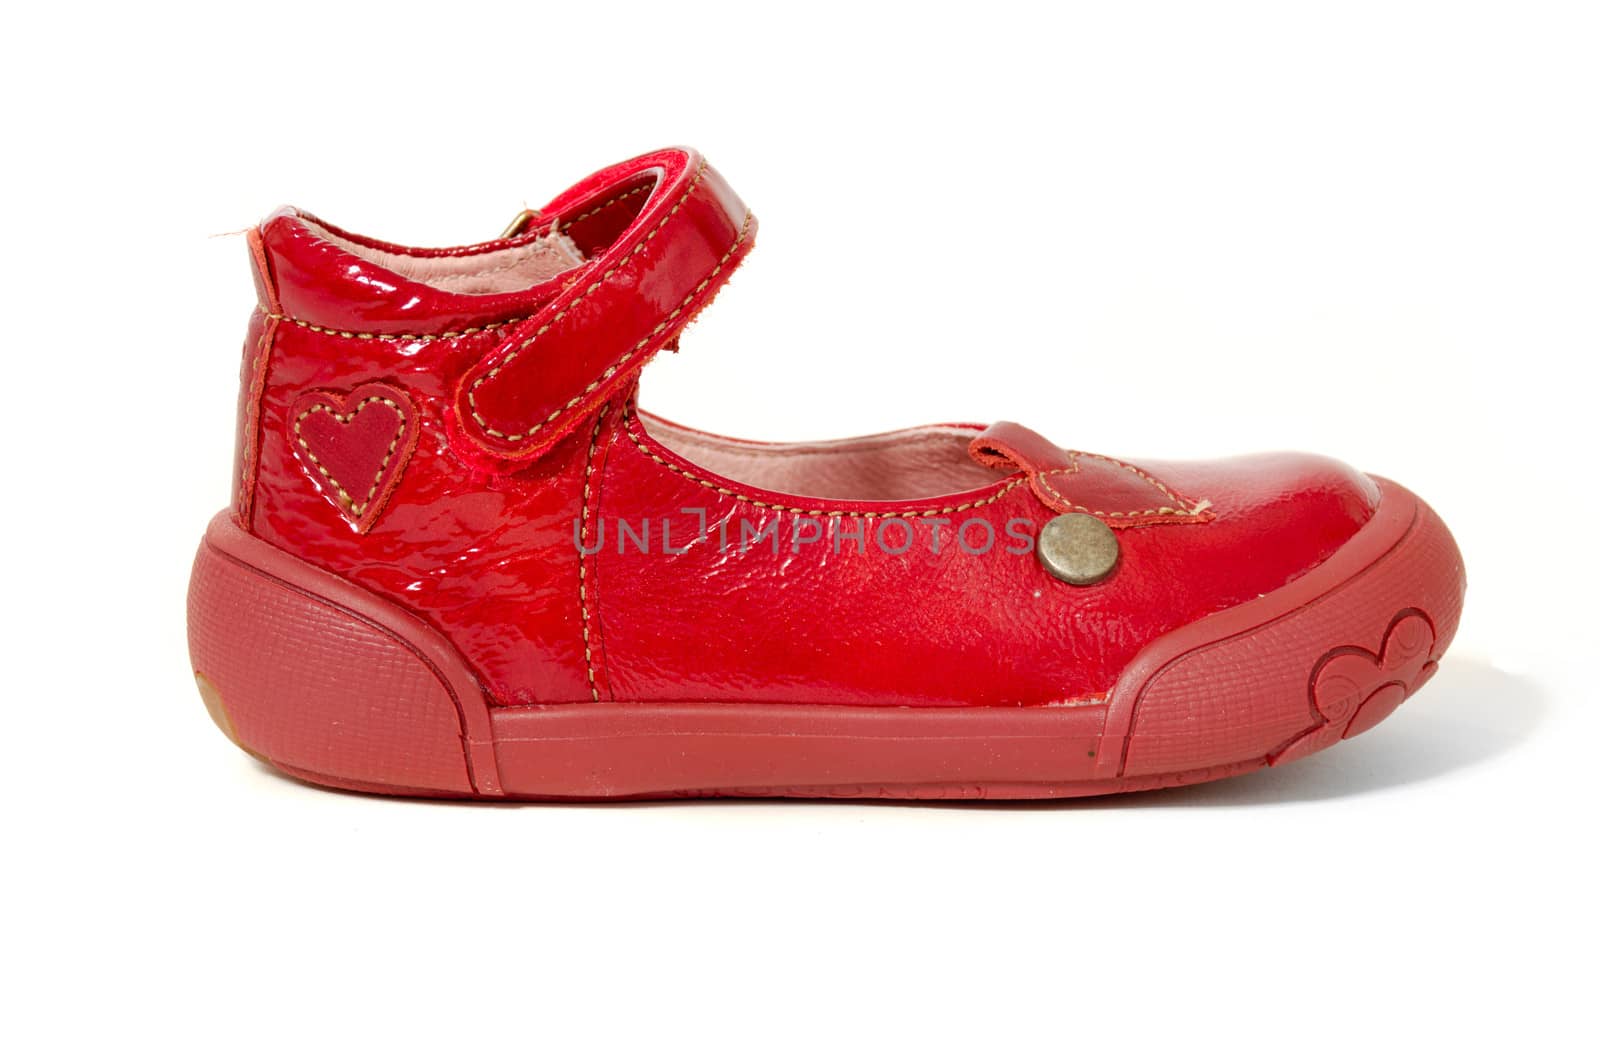 A red childs shoe. Taken on a clean white background.